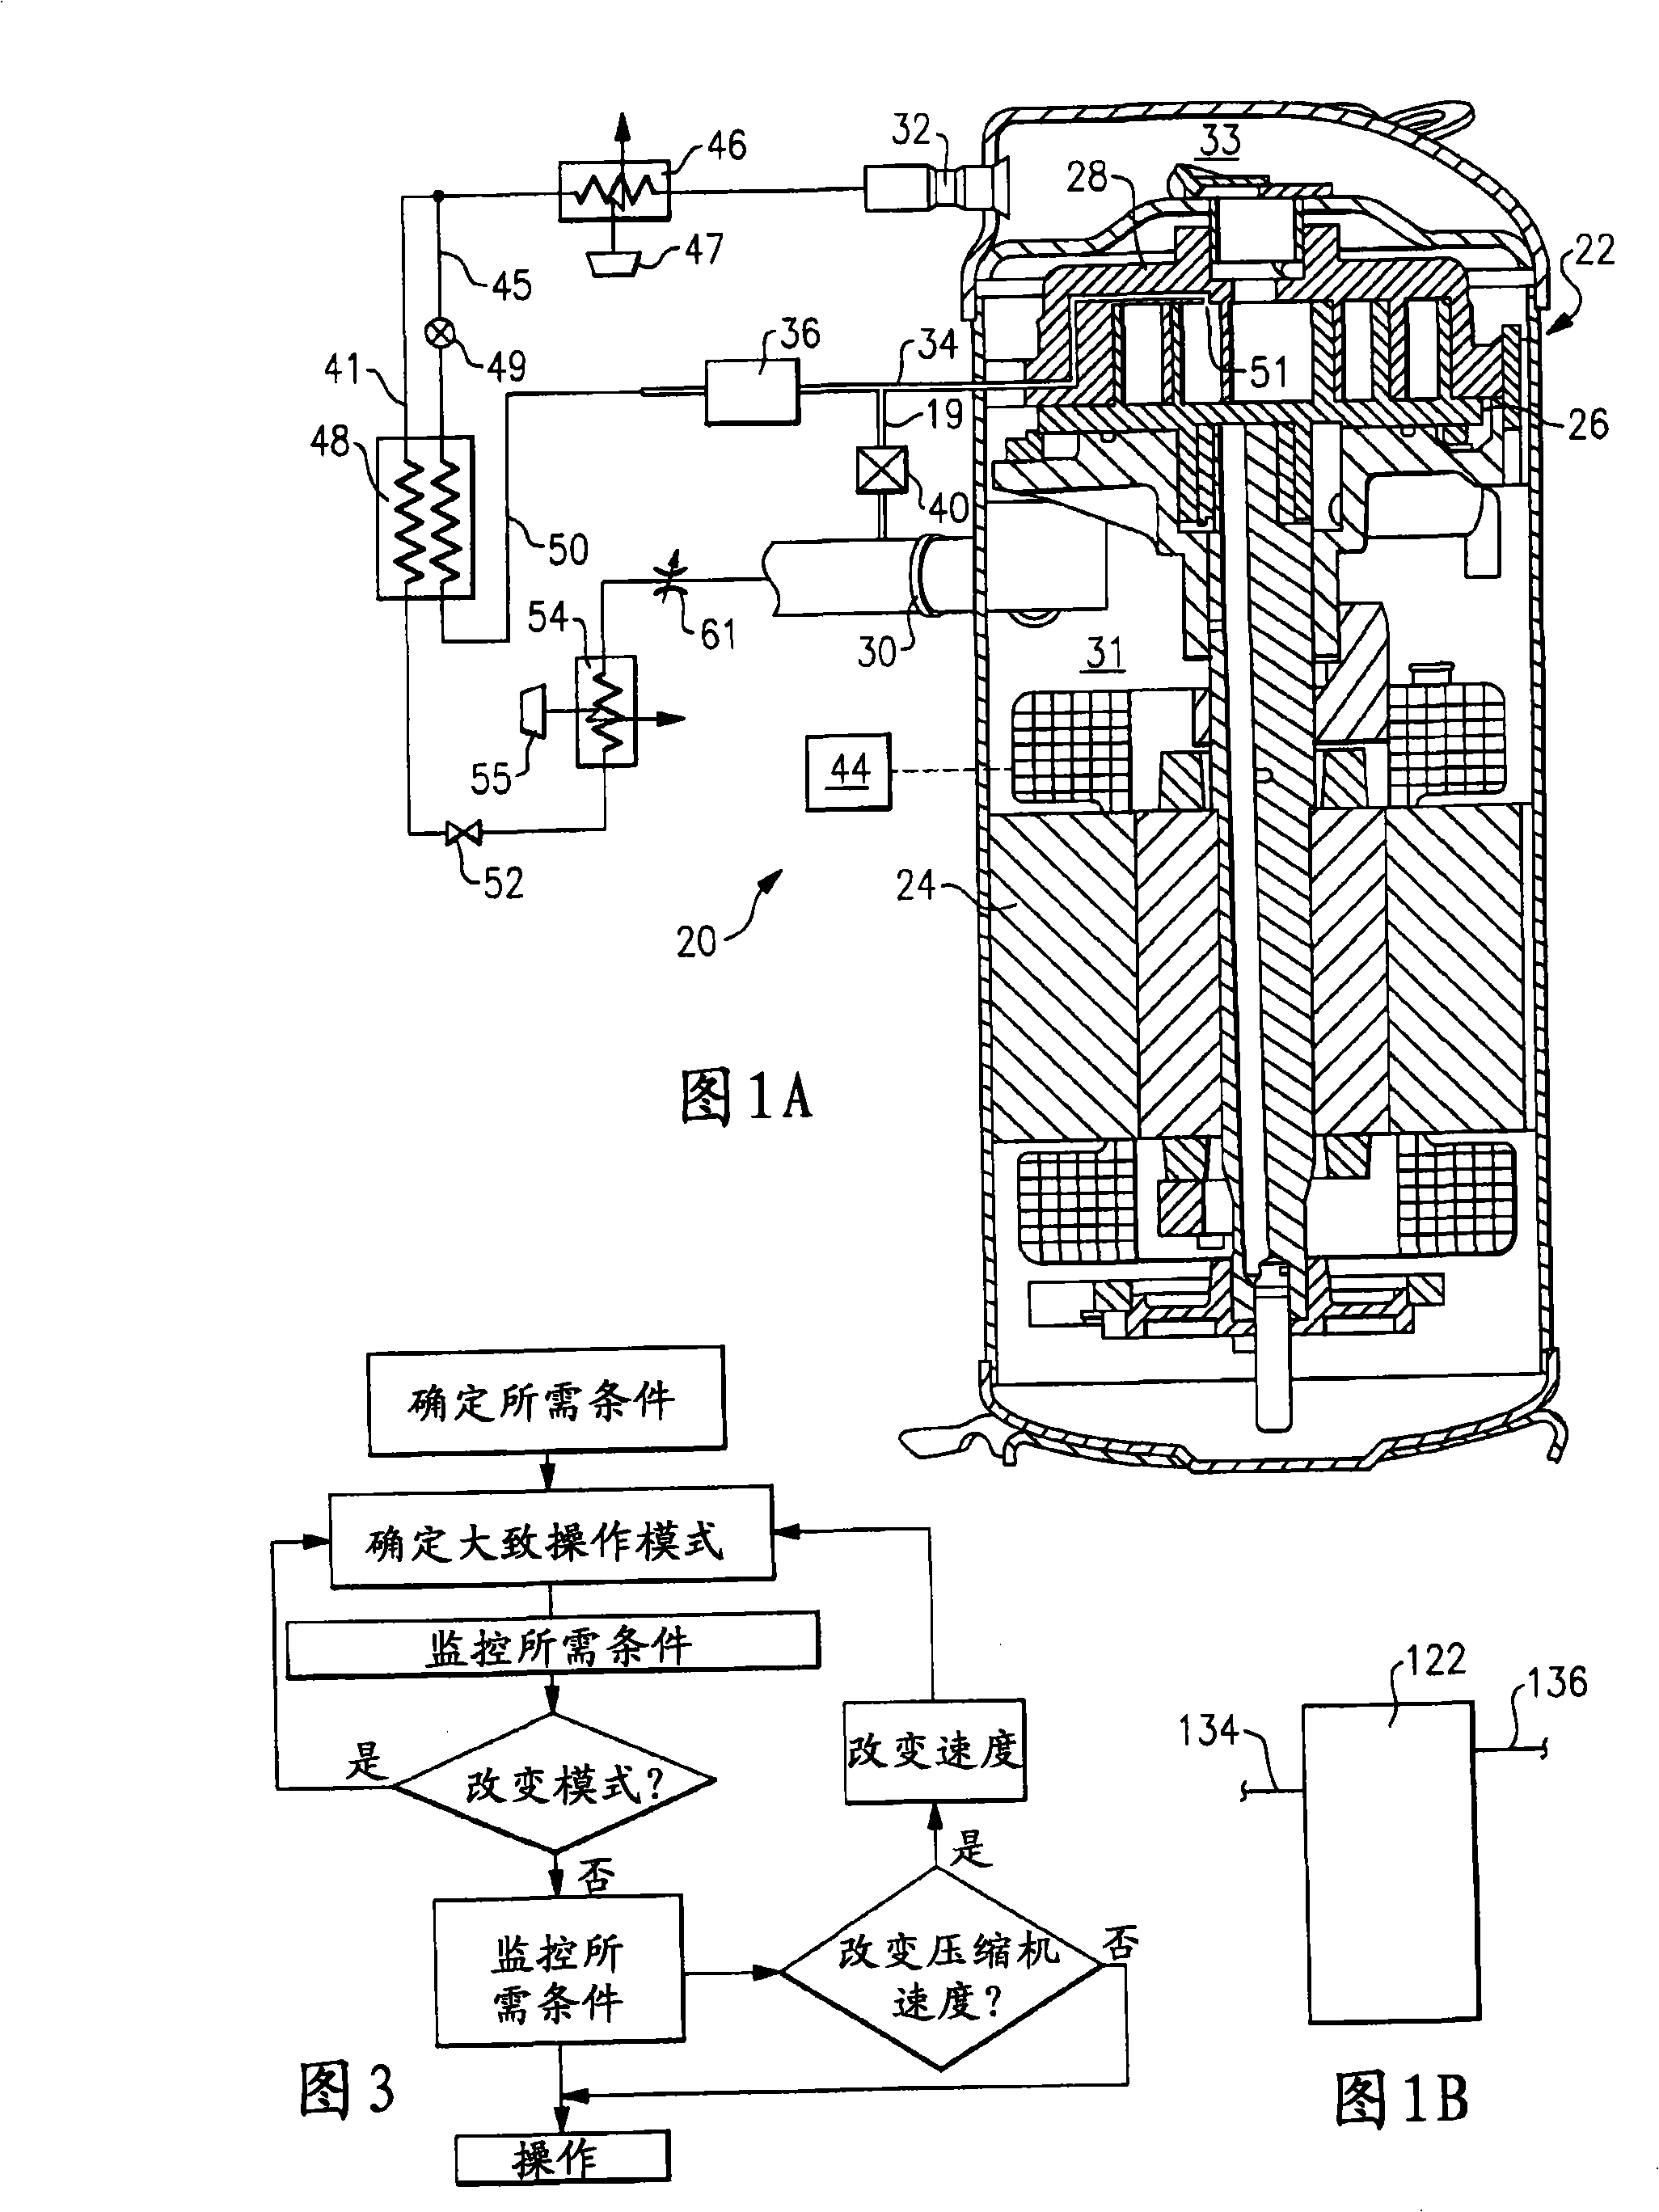 Refrigerant system possessing multi- speed cyclone compressor and economizer loop